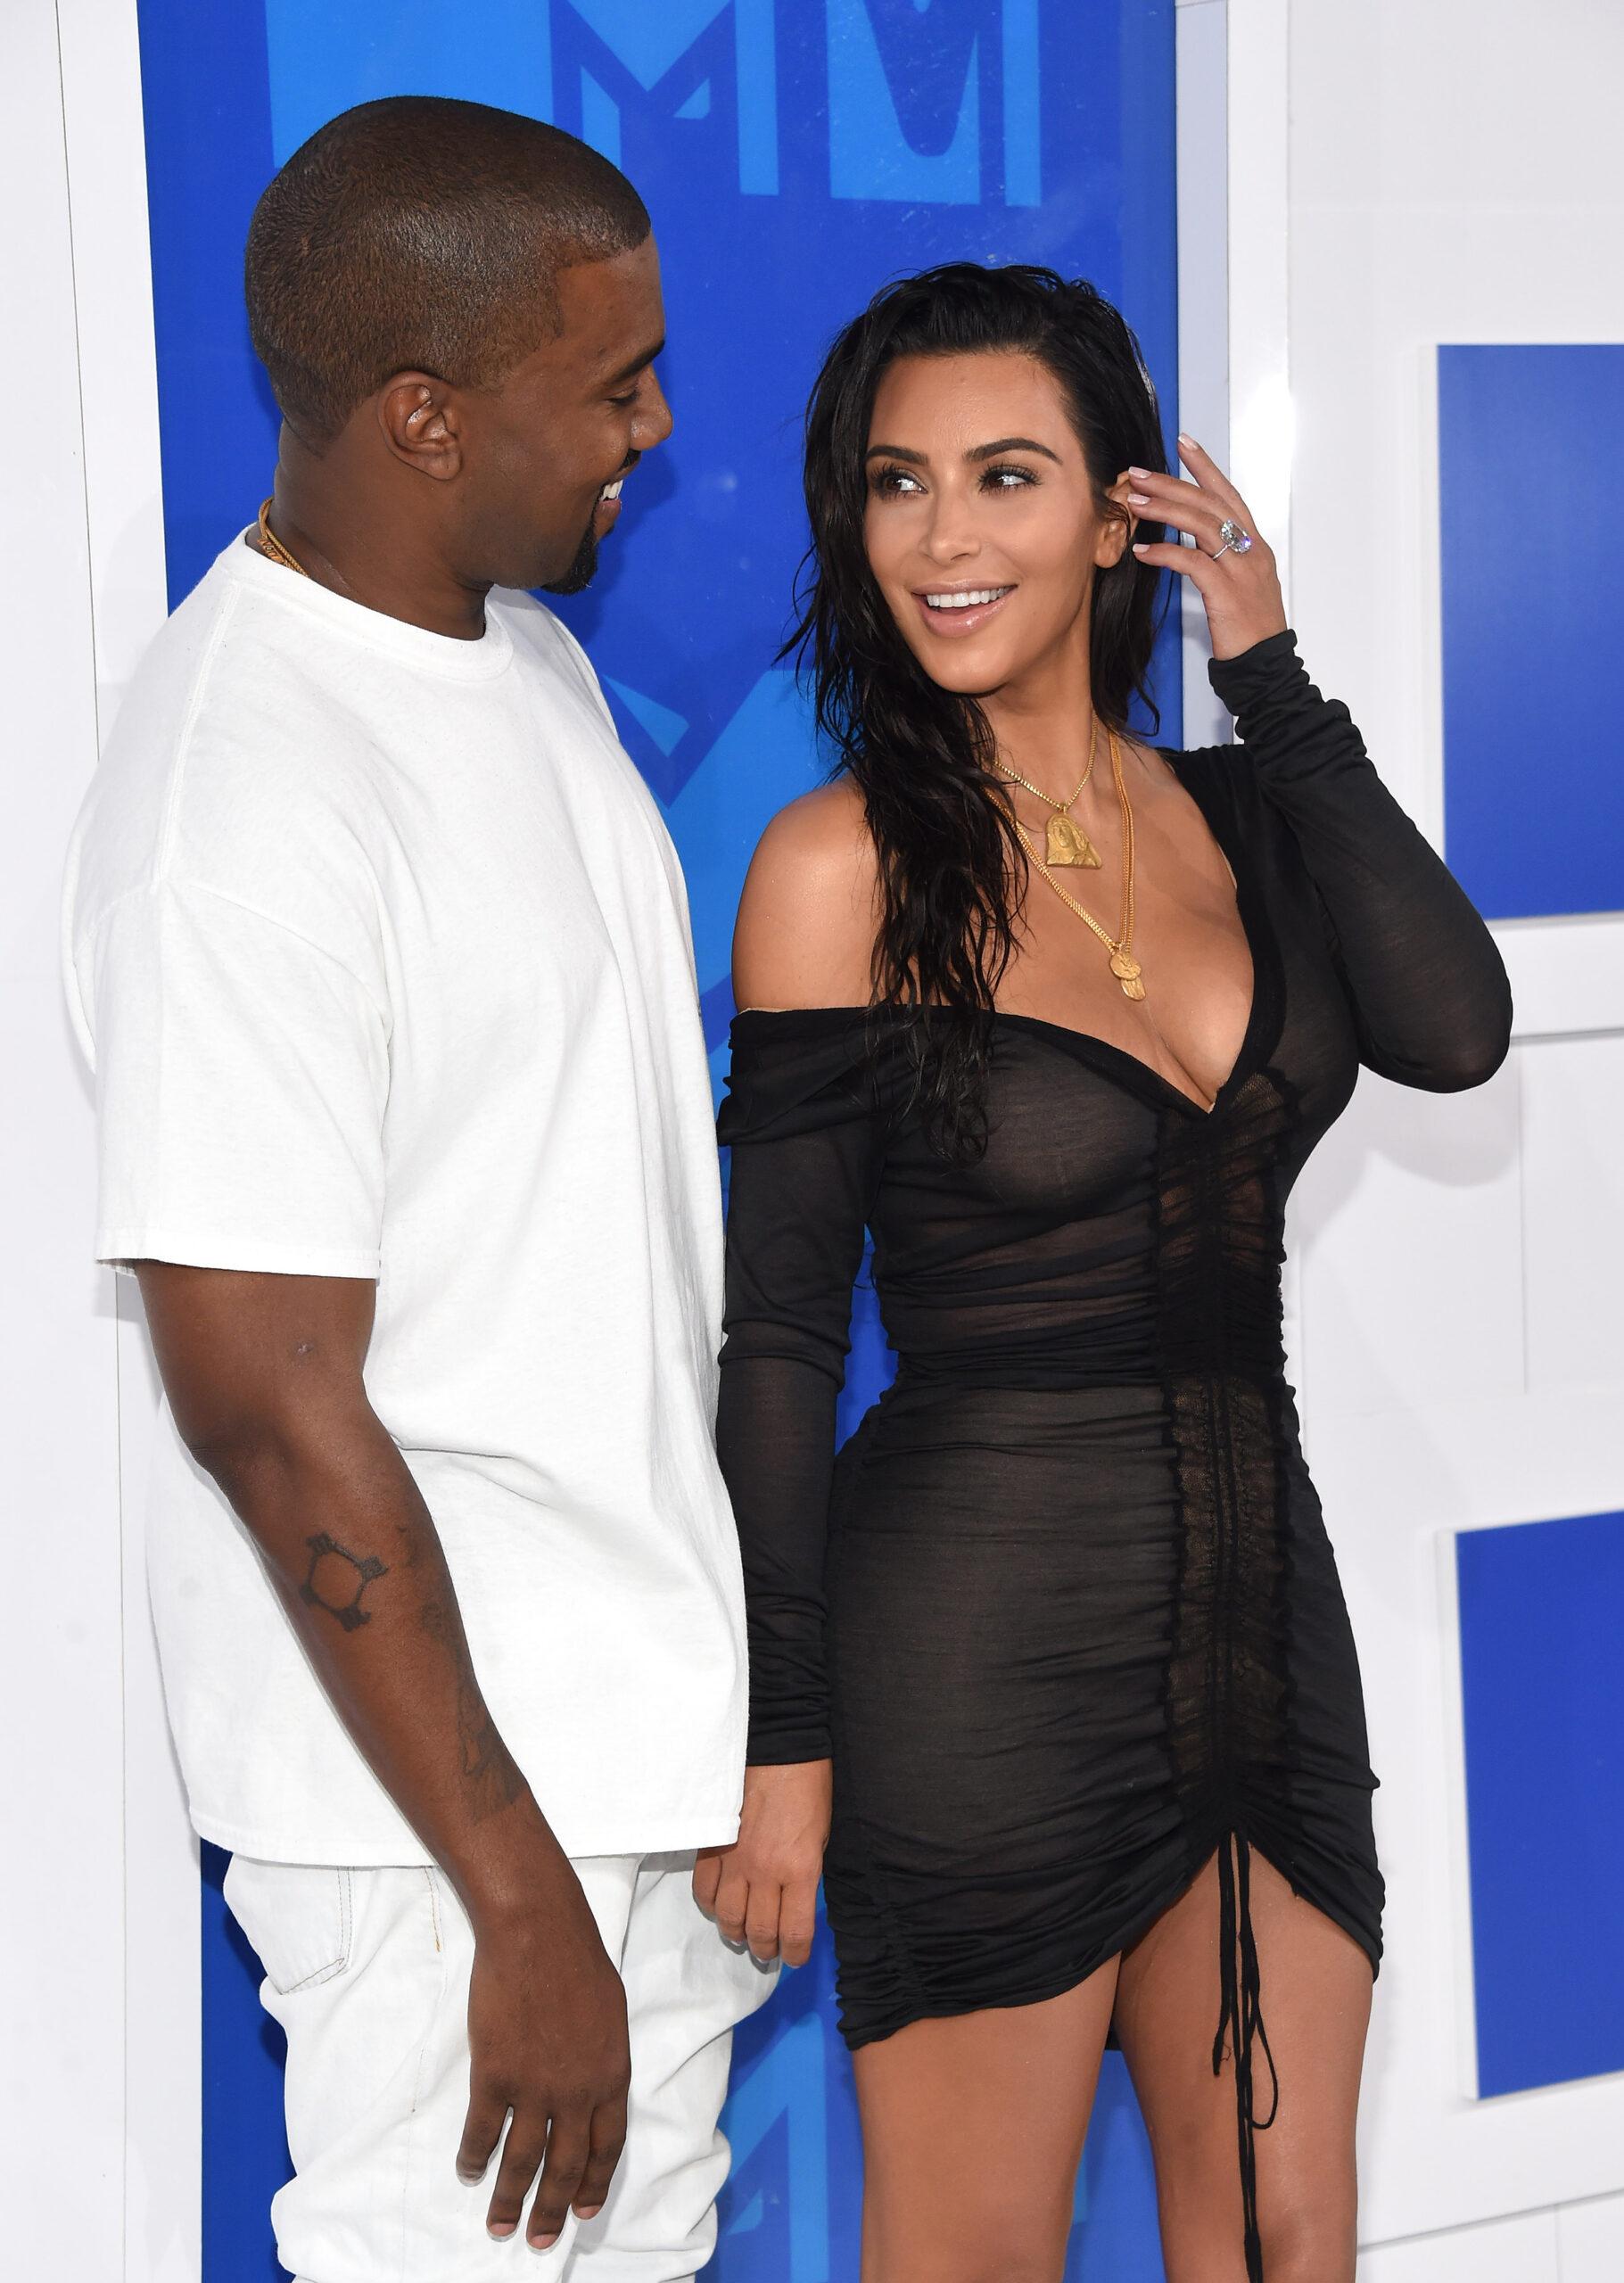 Kim Kardashian Is NOT Dropping 'West' From Her Last Name Following Divorce